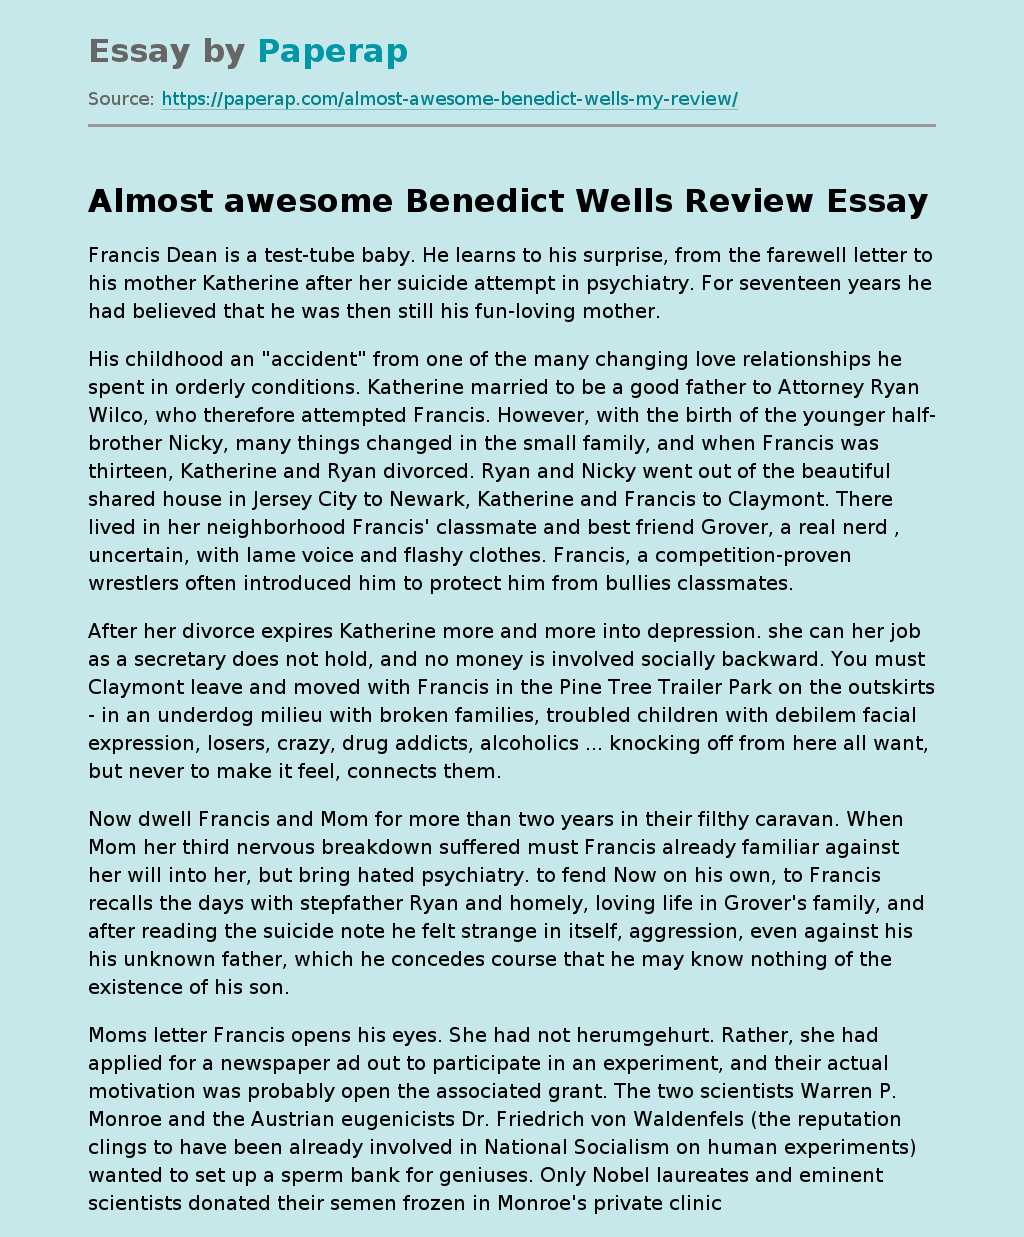 “Almost Awesome” by Benedict Wells